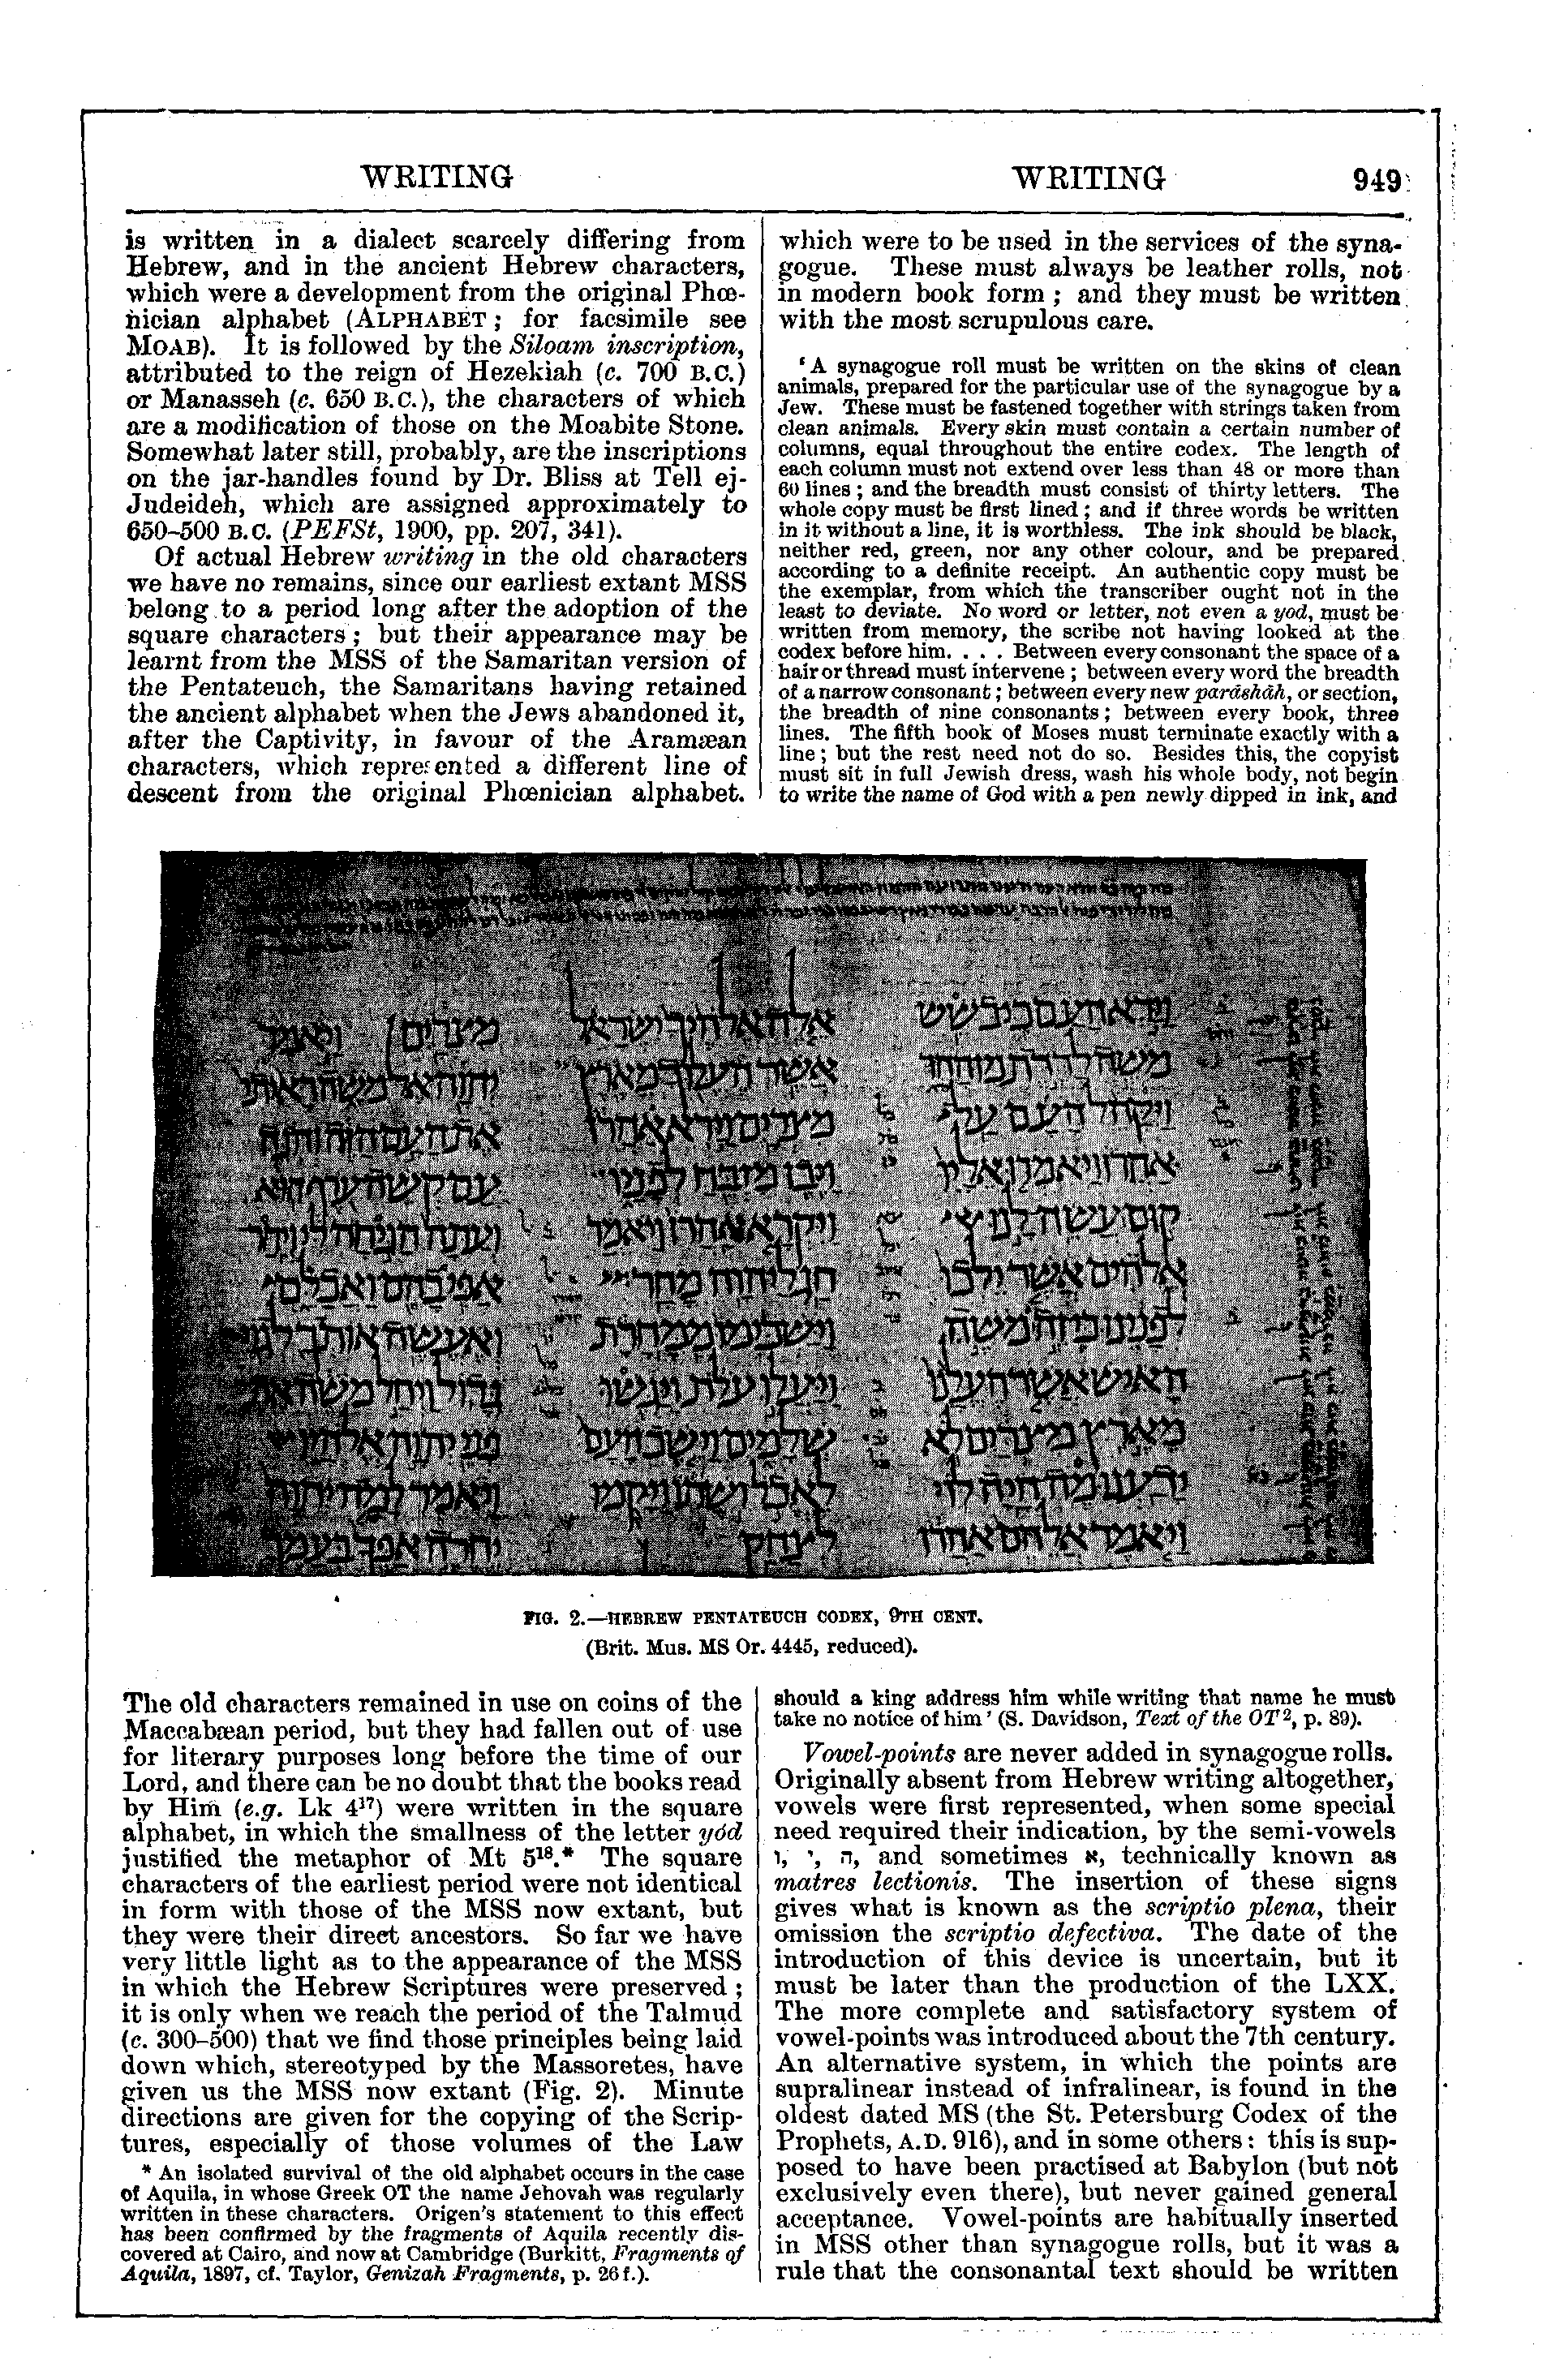 Image of page 949